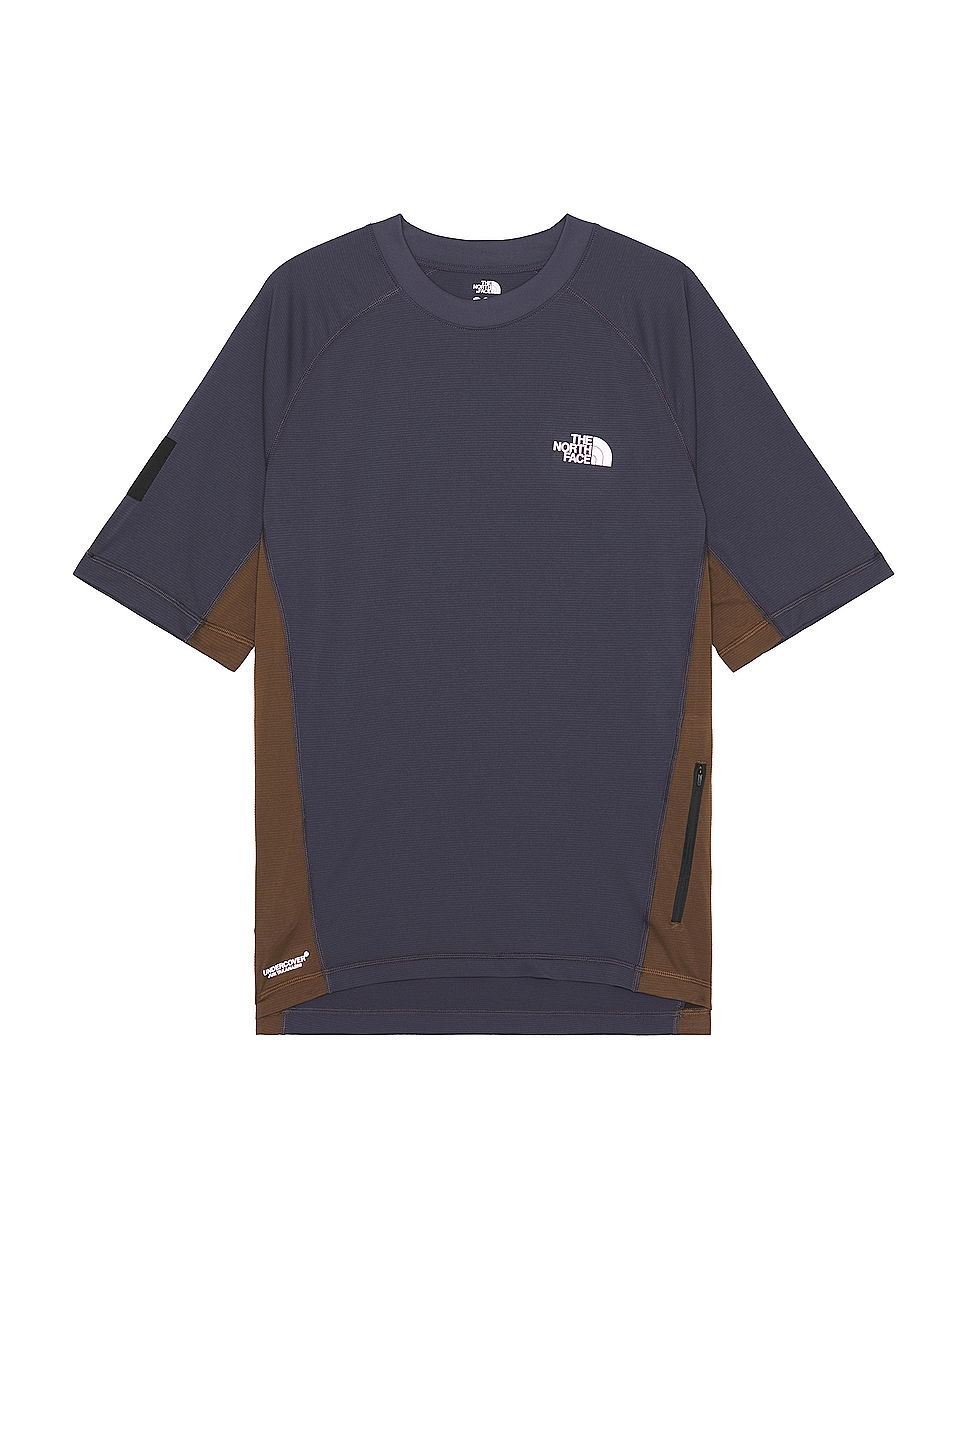 Image 1 of The North Face Soukuu Trail Run Short Sleeve Tee in Periscope Grey